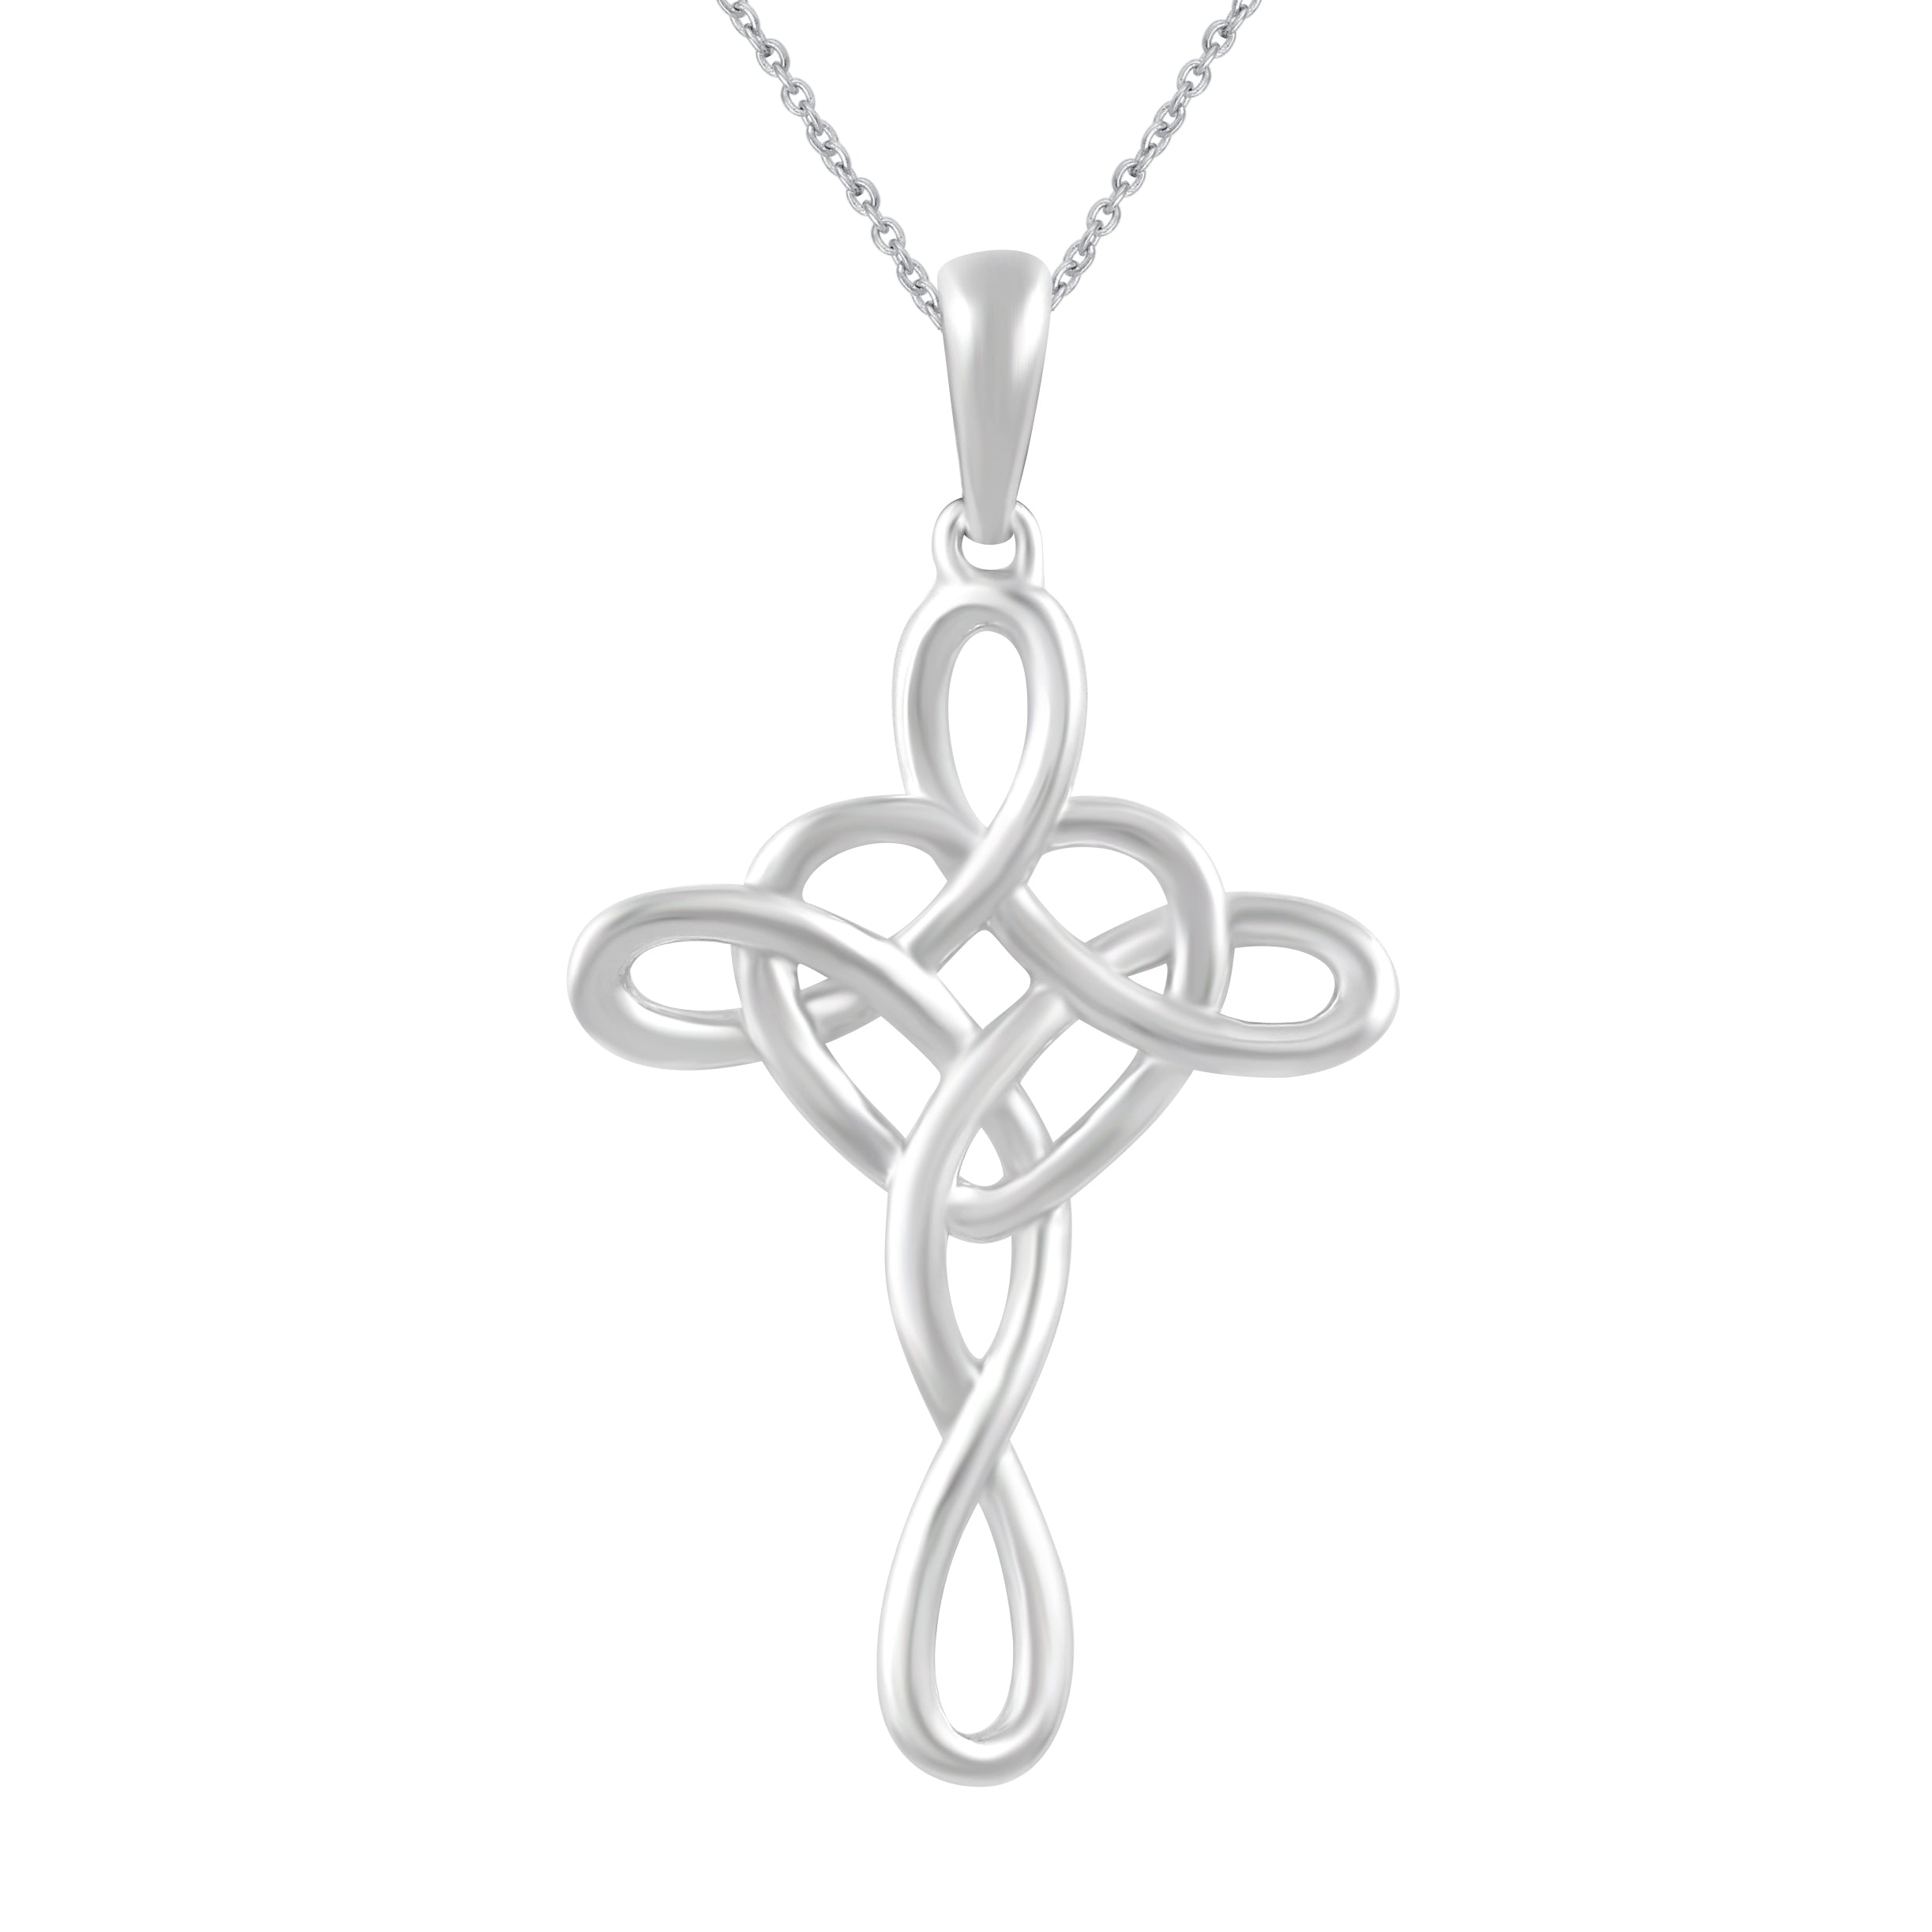 Celtic Love Knot Cross Infinity Heart Necklace Pendant in 925